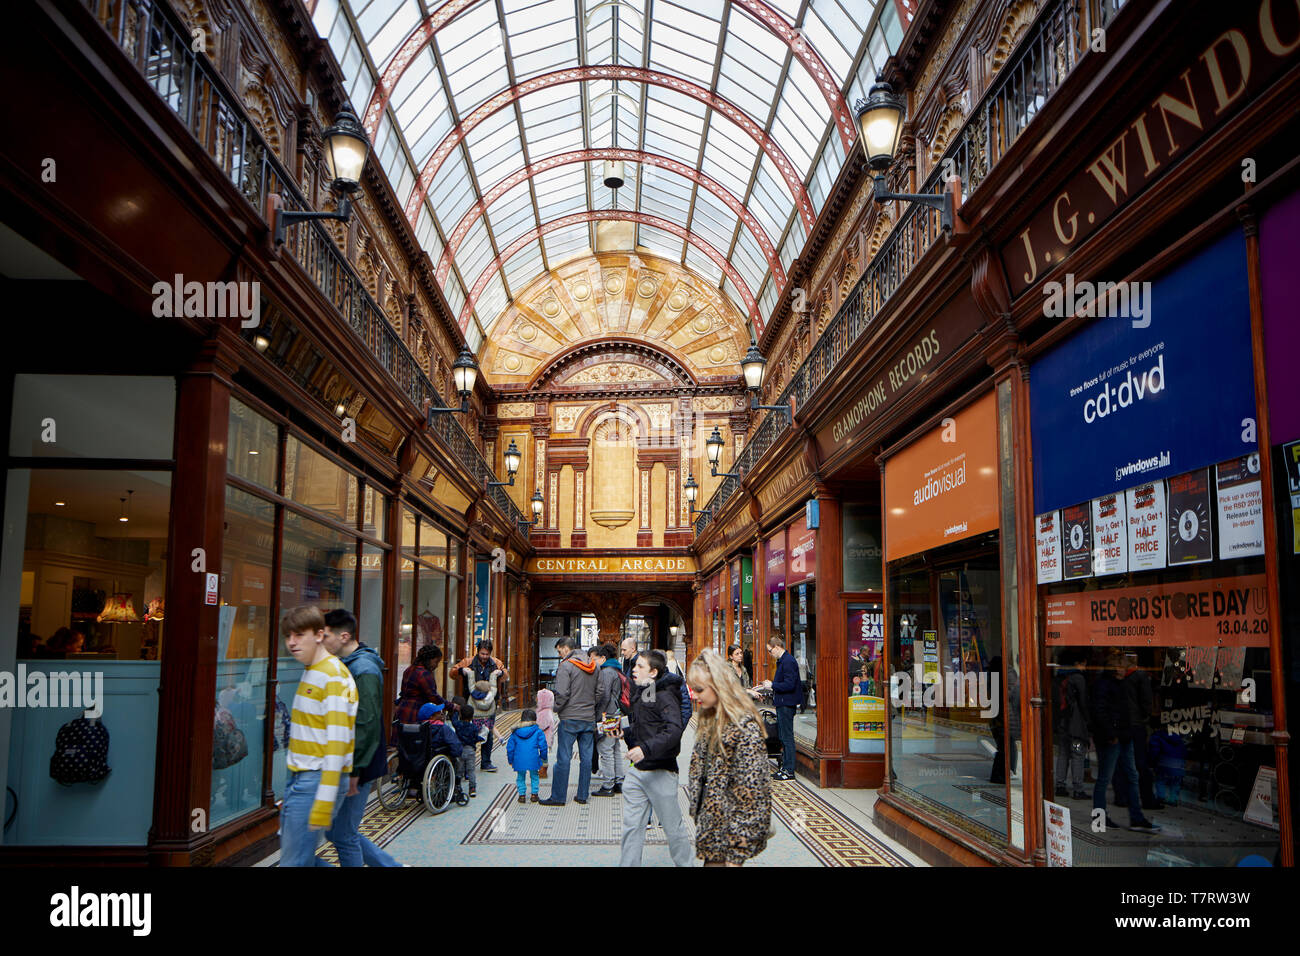 Newcastle upon Tyne, shy welsh gypsy Central Arcade, elegant Edwardian tiled shopping arcade built 1906 designed by Oswald and Son Stock Photo